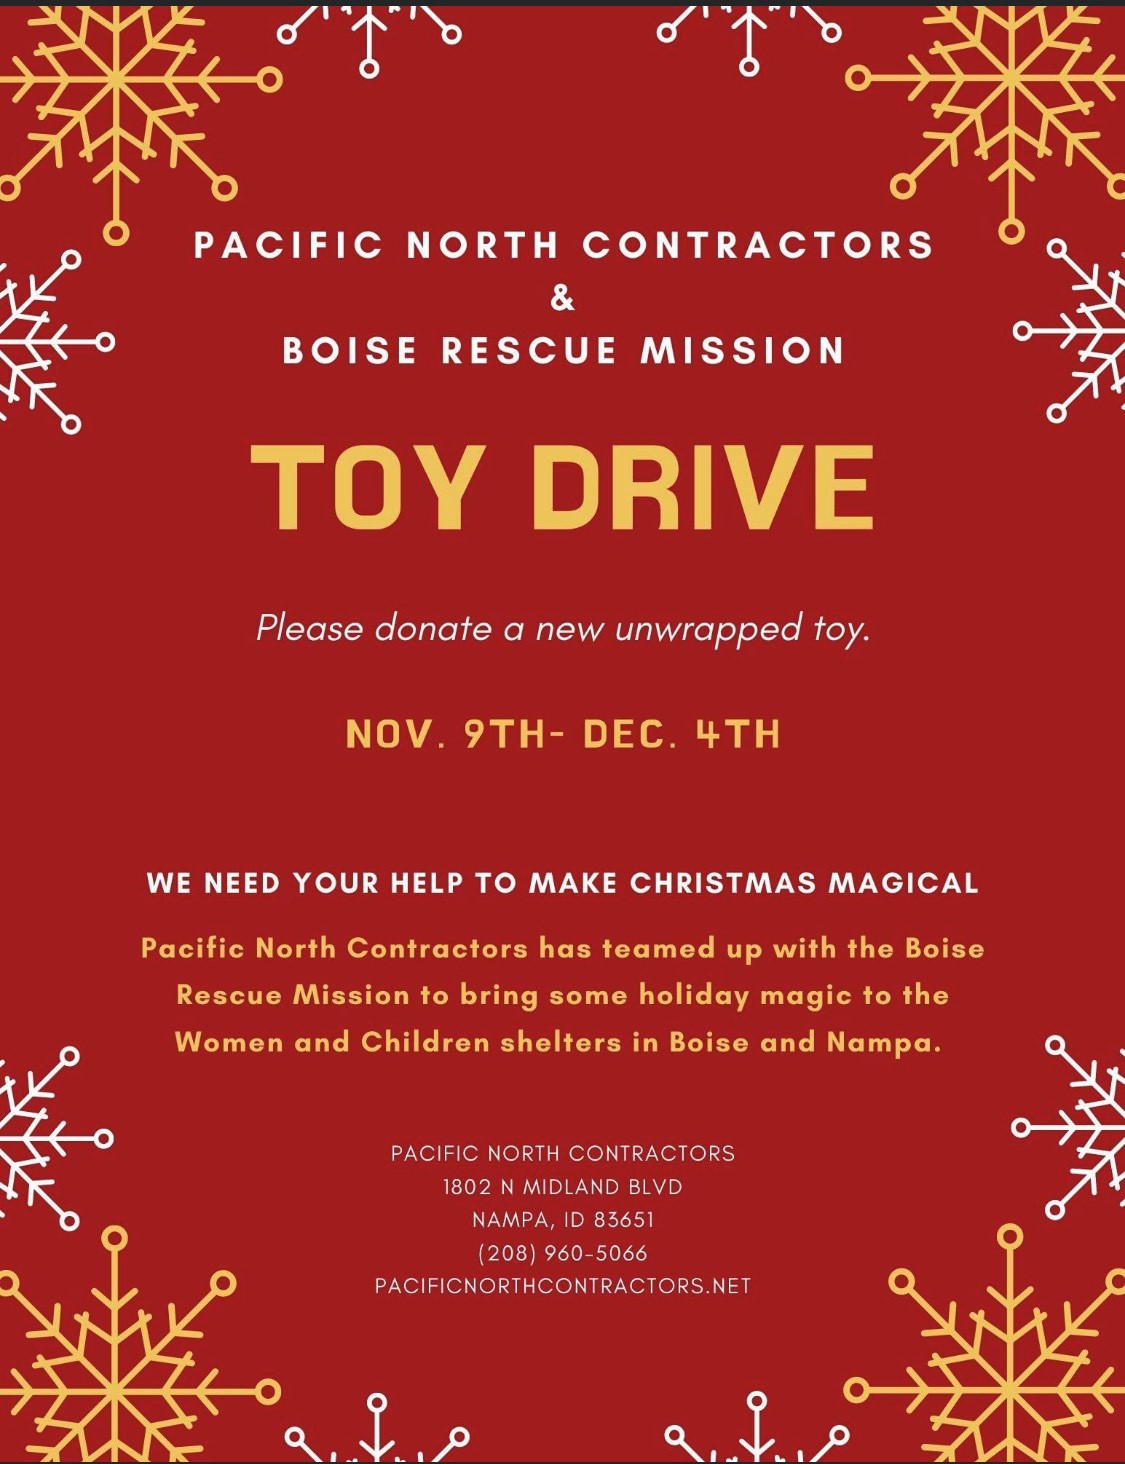 PNC and Boise Rescue Mission Toy drive